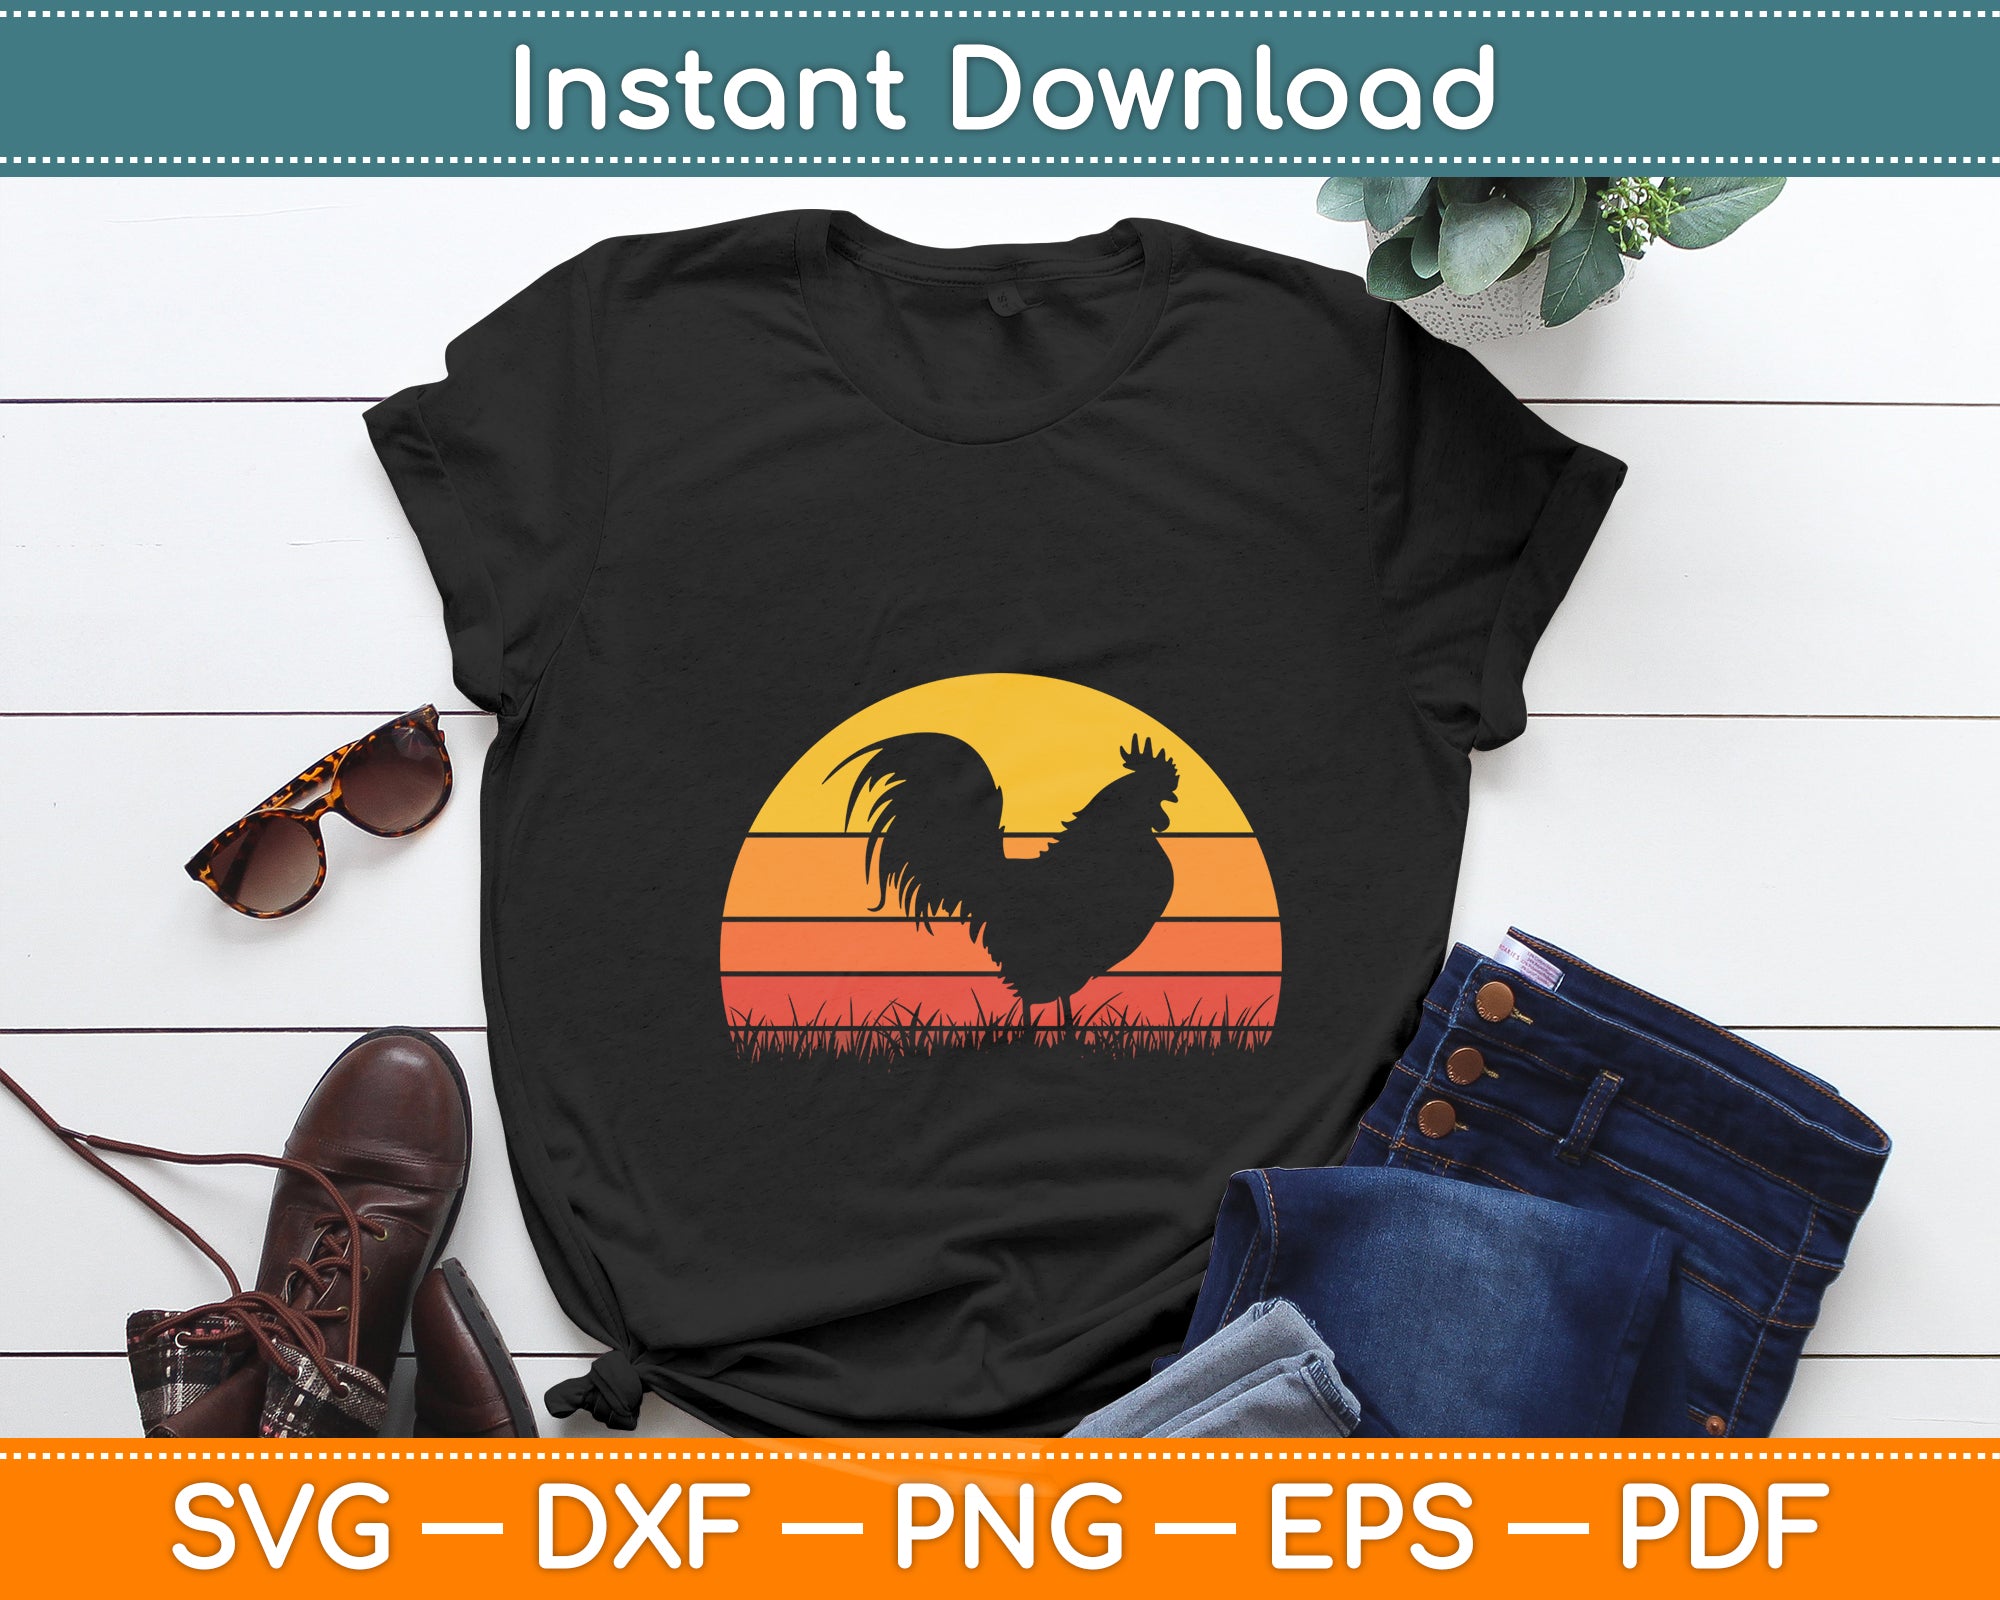 Create an eco hipster rooster shirt with flying pigs (read